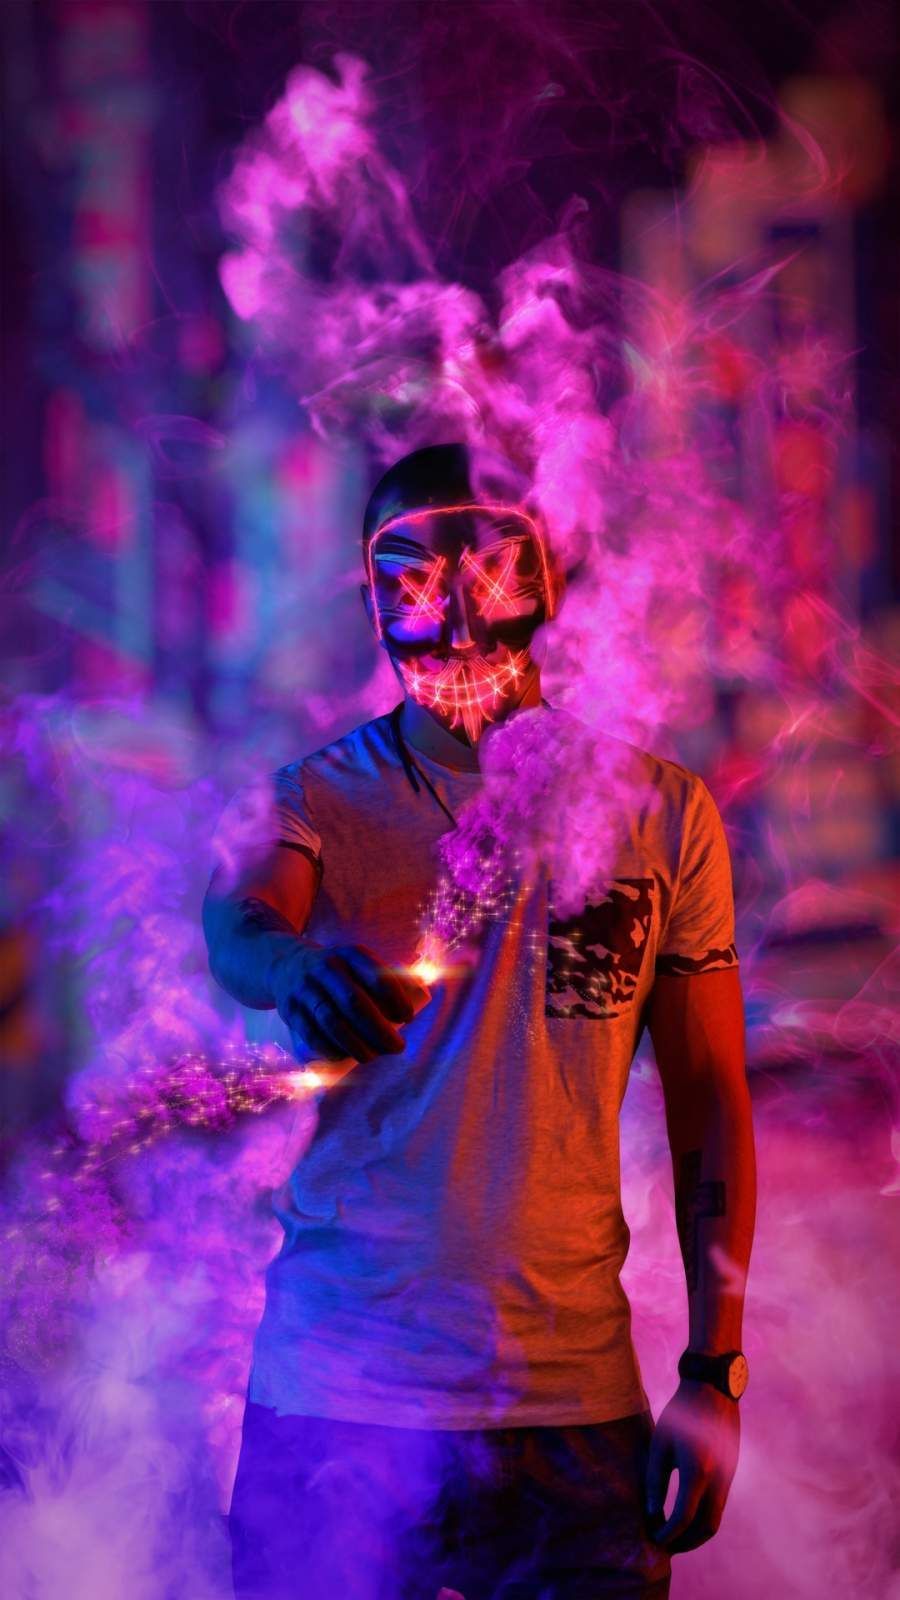 Anonymus Mask Smoke iPhone Wallpaper. Hipster wallpaper, iPhone wallpaper, Cool wallpaper for phones